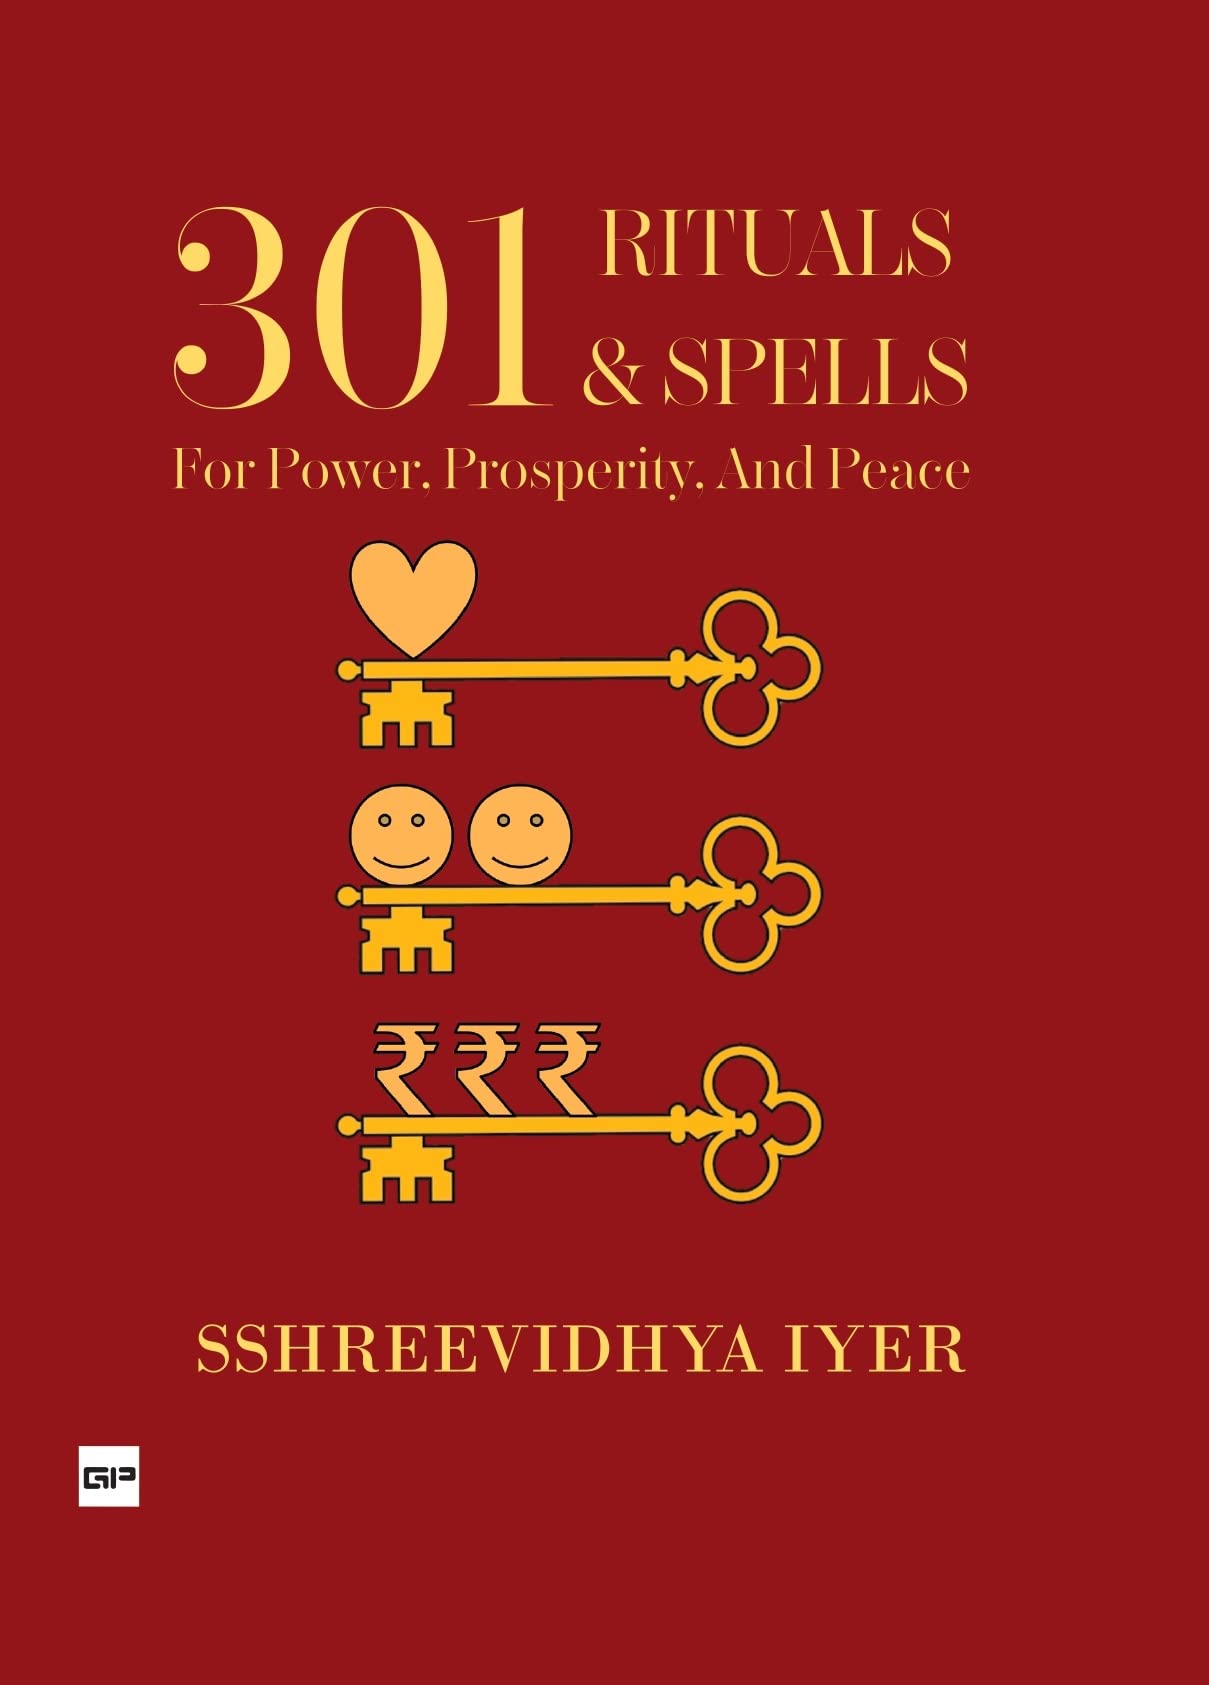 301 Rituals & Spells for Power, Prosperity and Peace